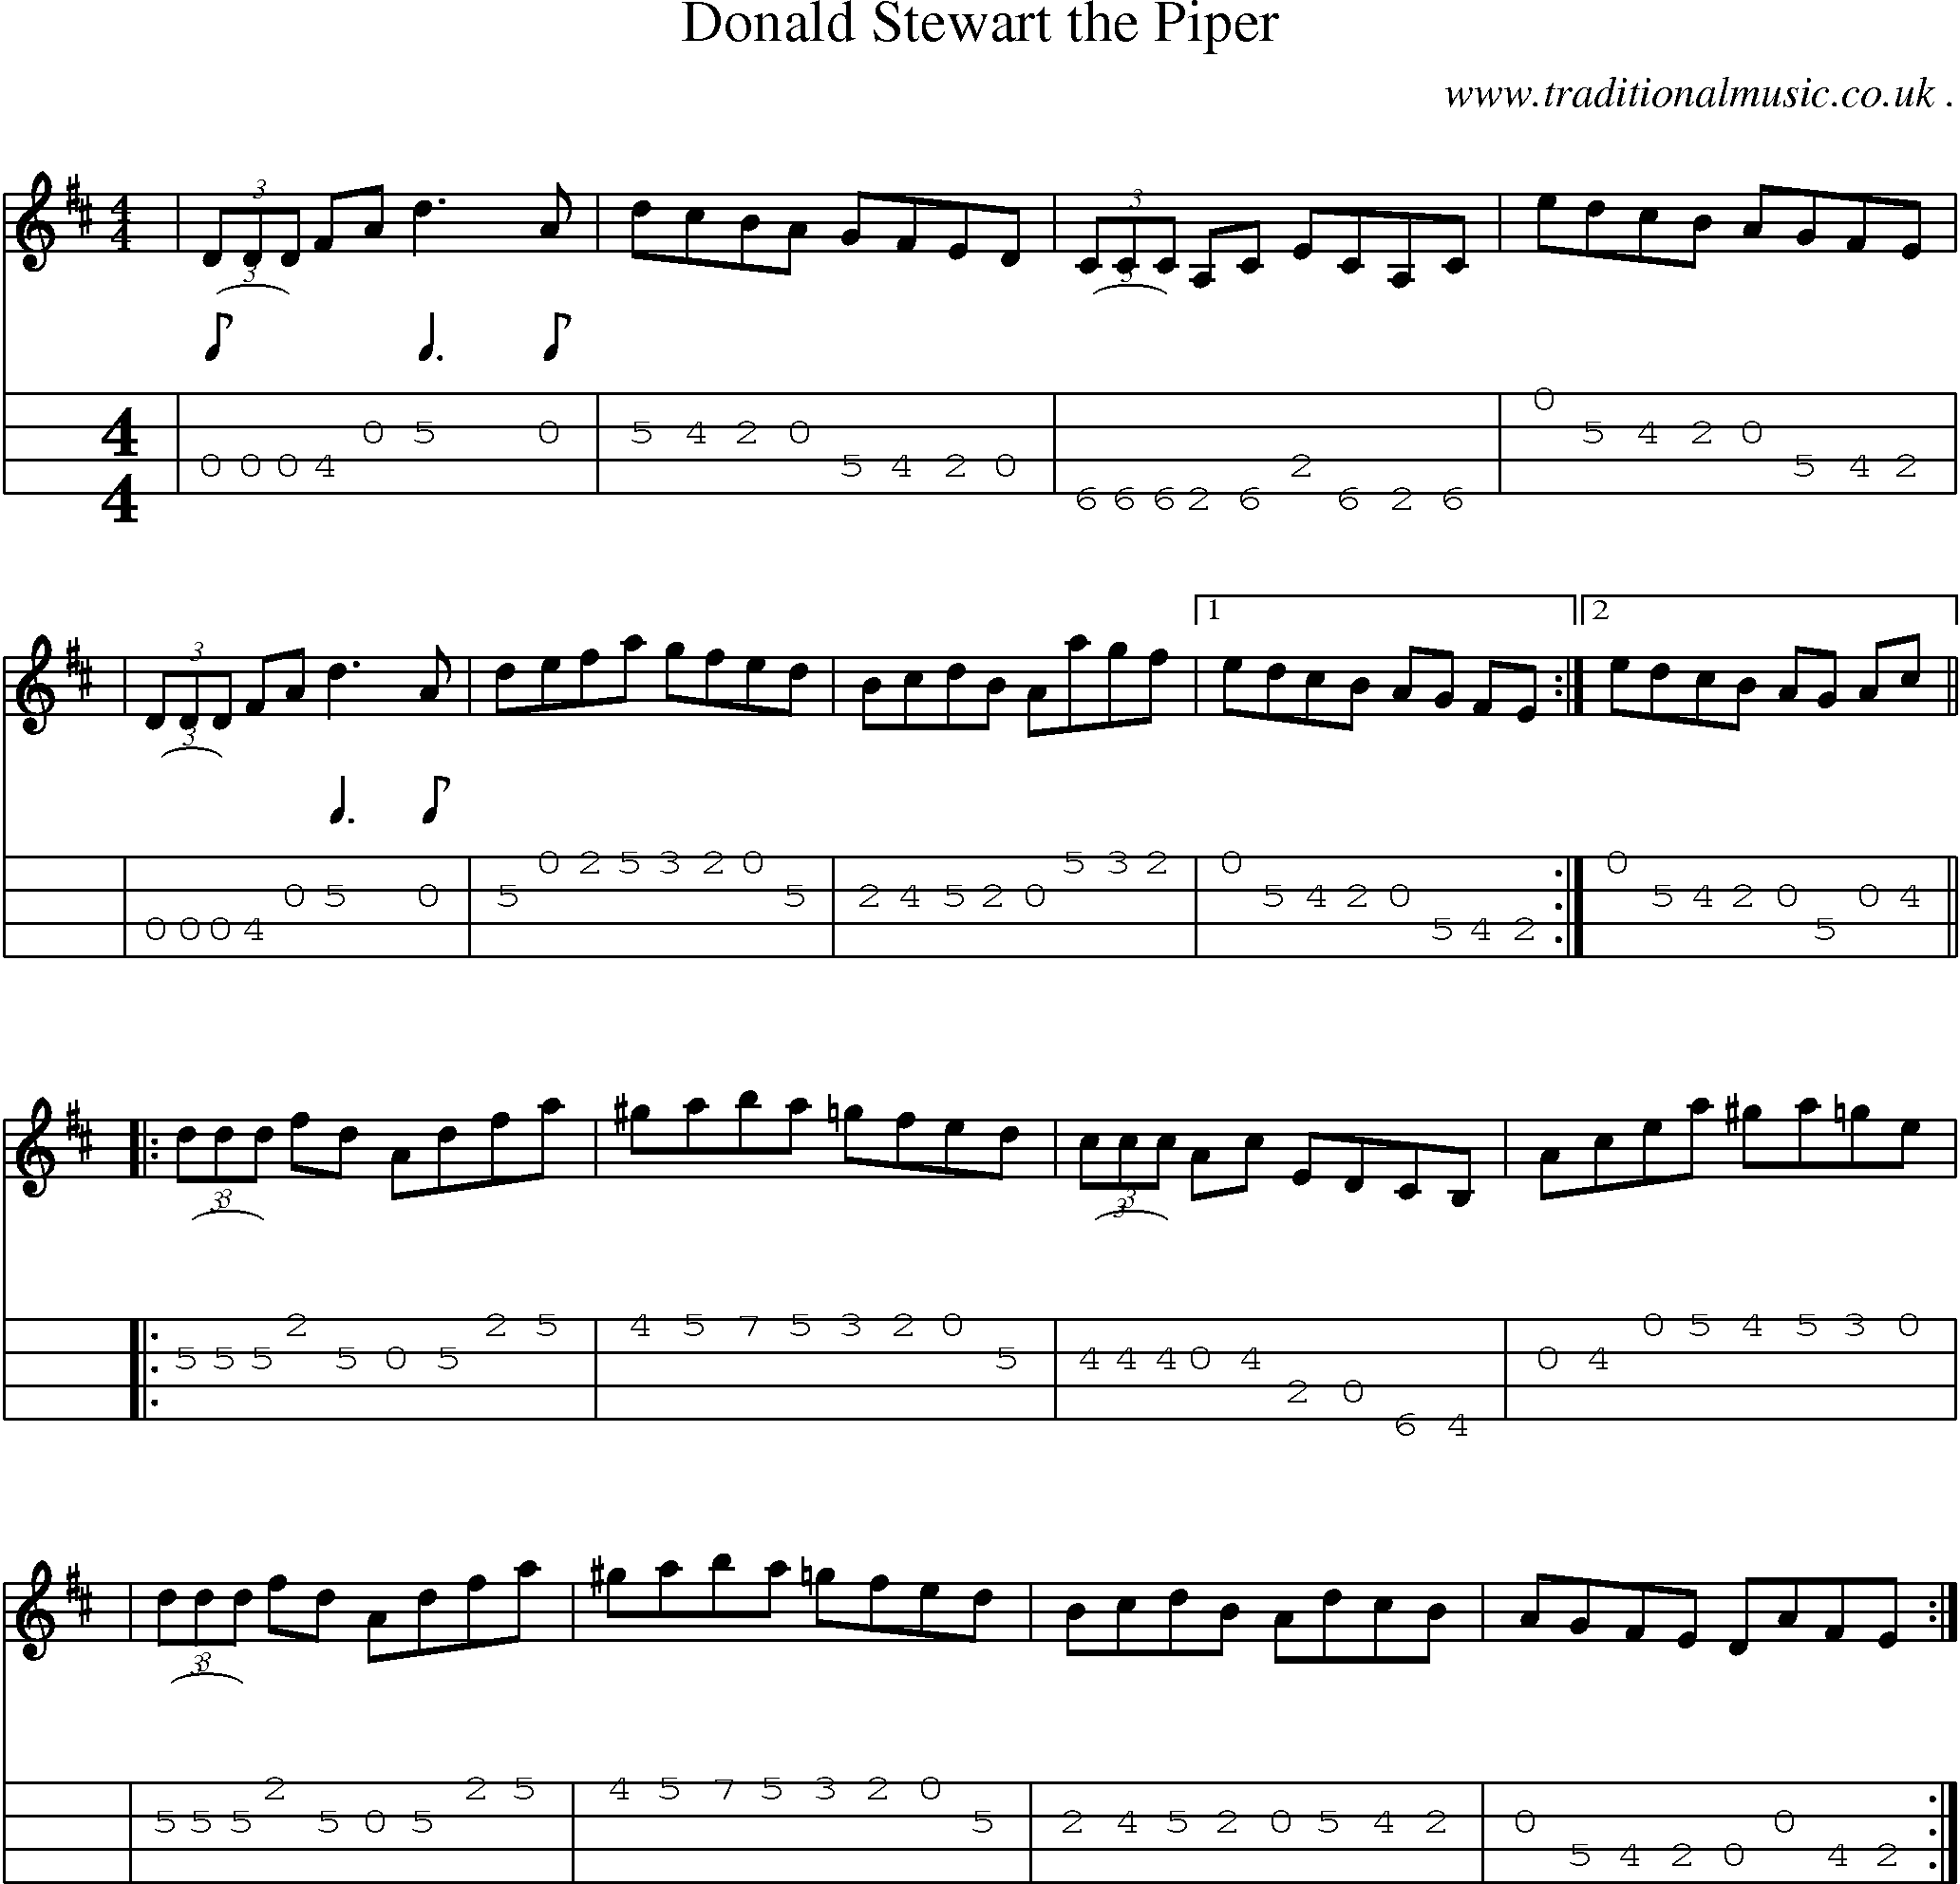 Sheet-music  score, Chords and Mandolin Tabs for Donald Stewart The Piper